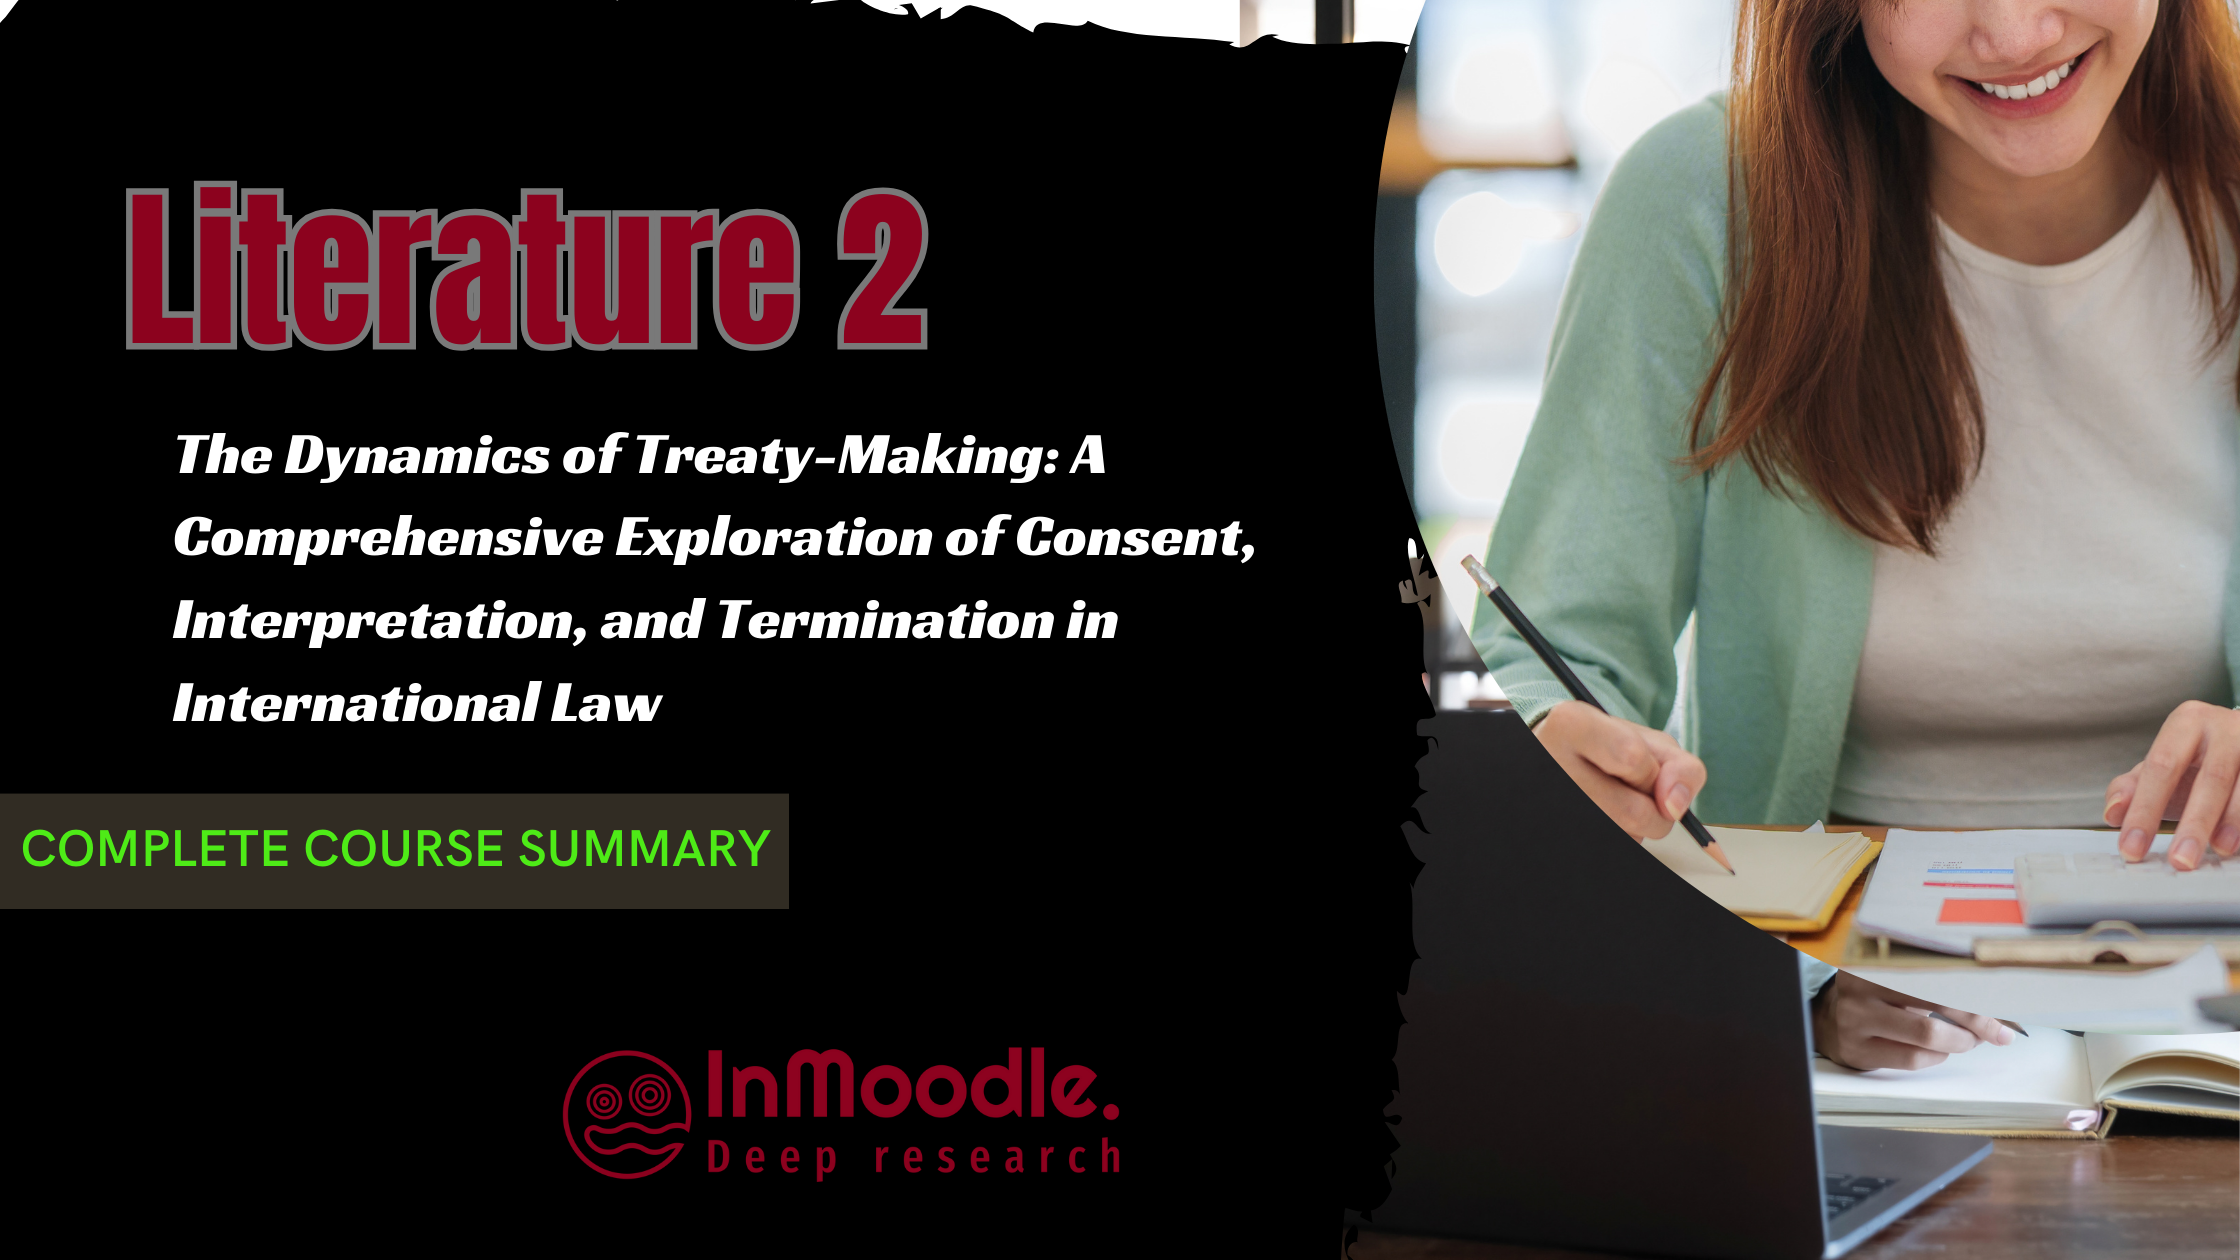 The Dynamics of Treaty-Making: A Comprehensive Exploration of Consent, Interpretation, and Termination in International Law